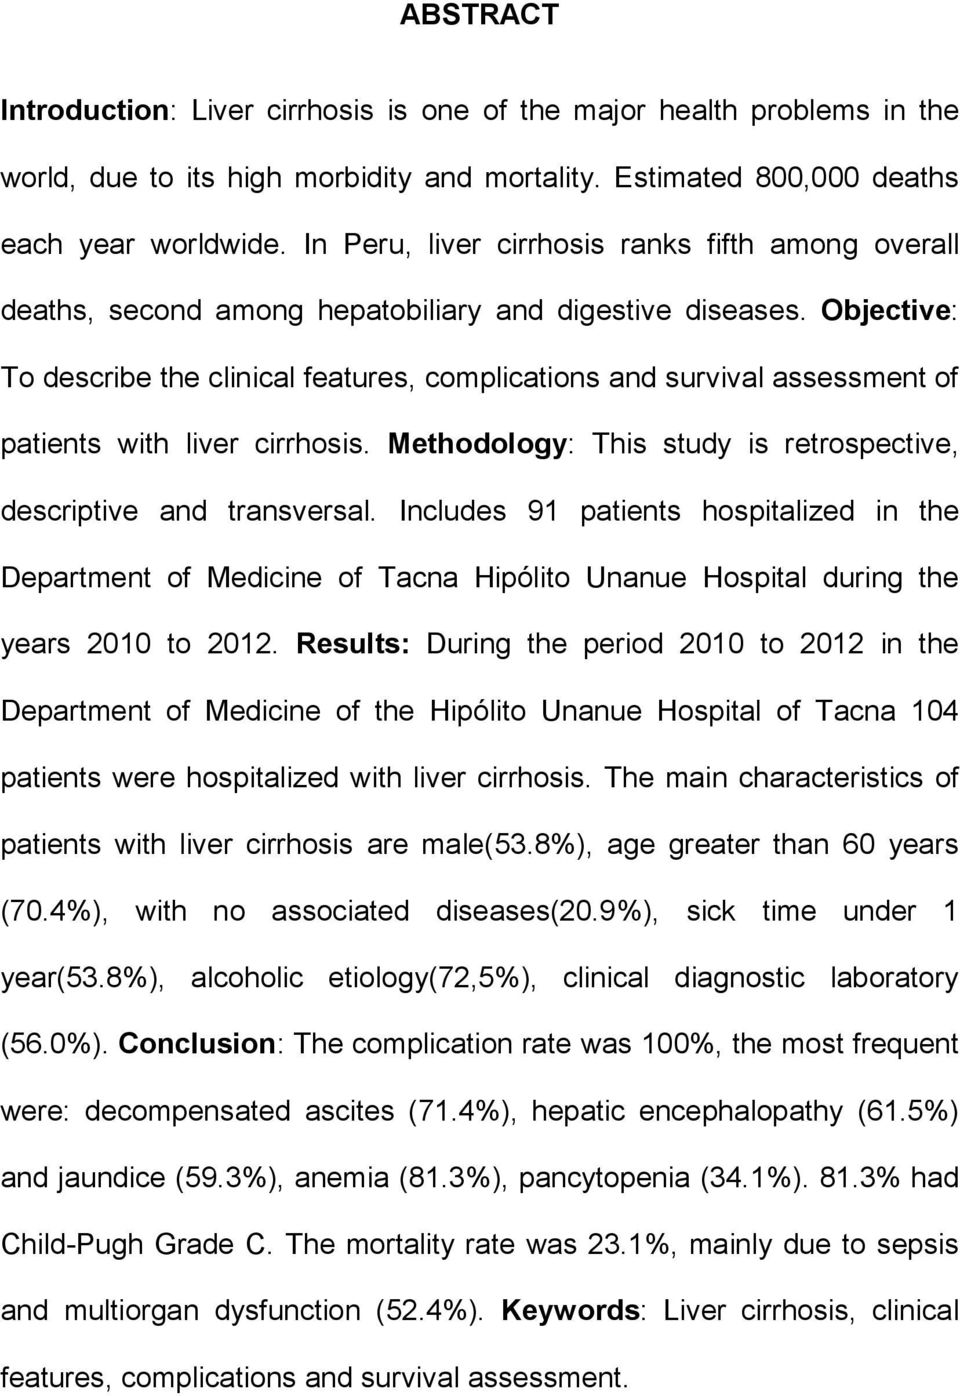 Objective: To describe the clinical features, complications and survival assessment of patients with liver cirrhosis. Methodology: This study is retrospective, descriptive and transversal.